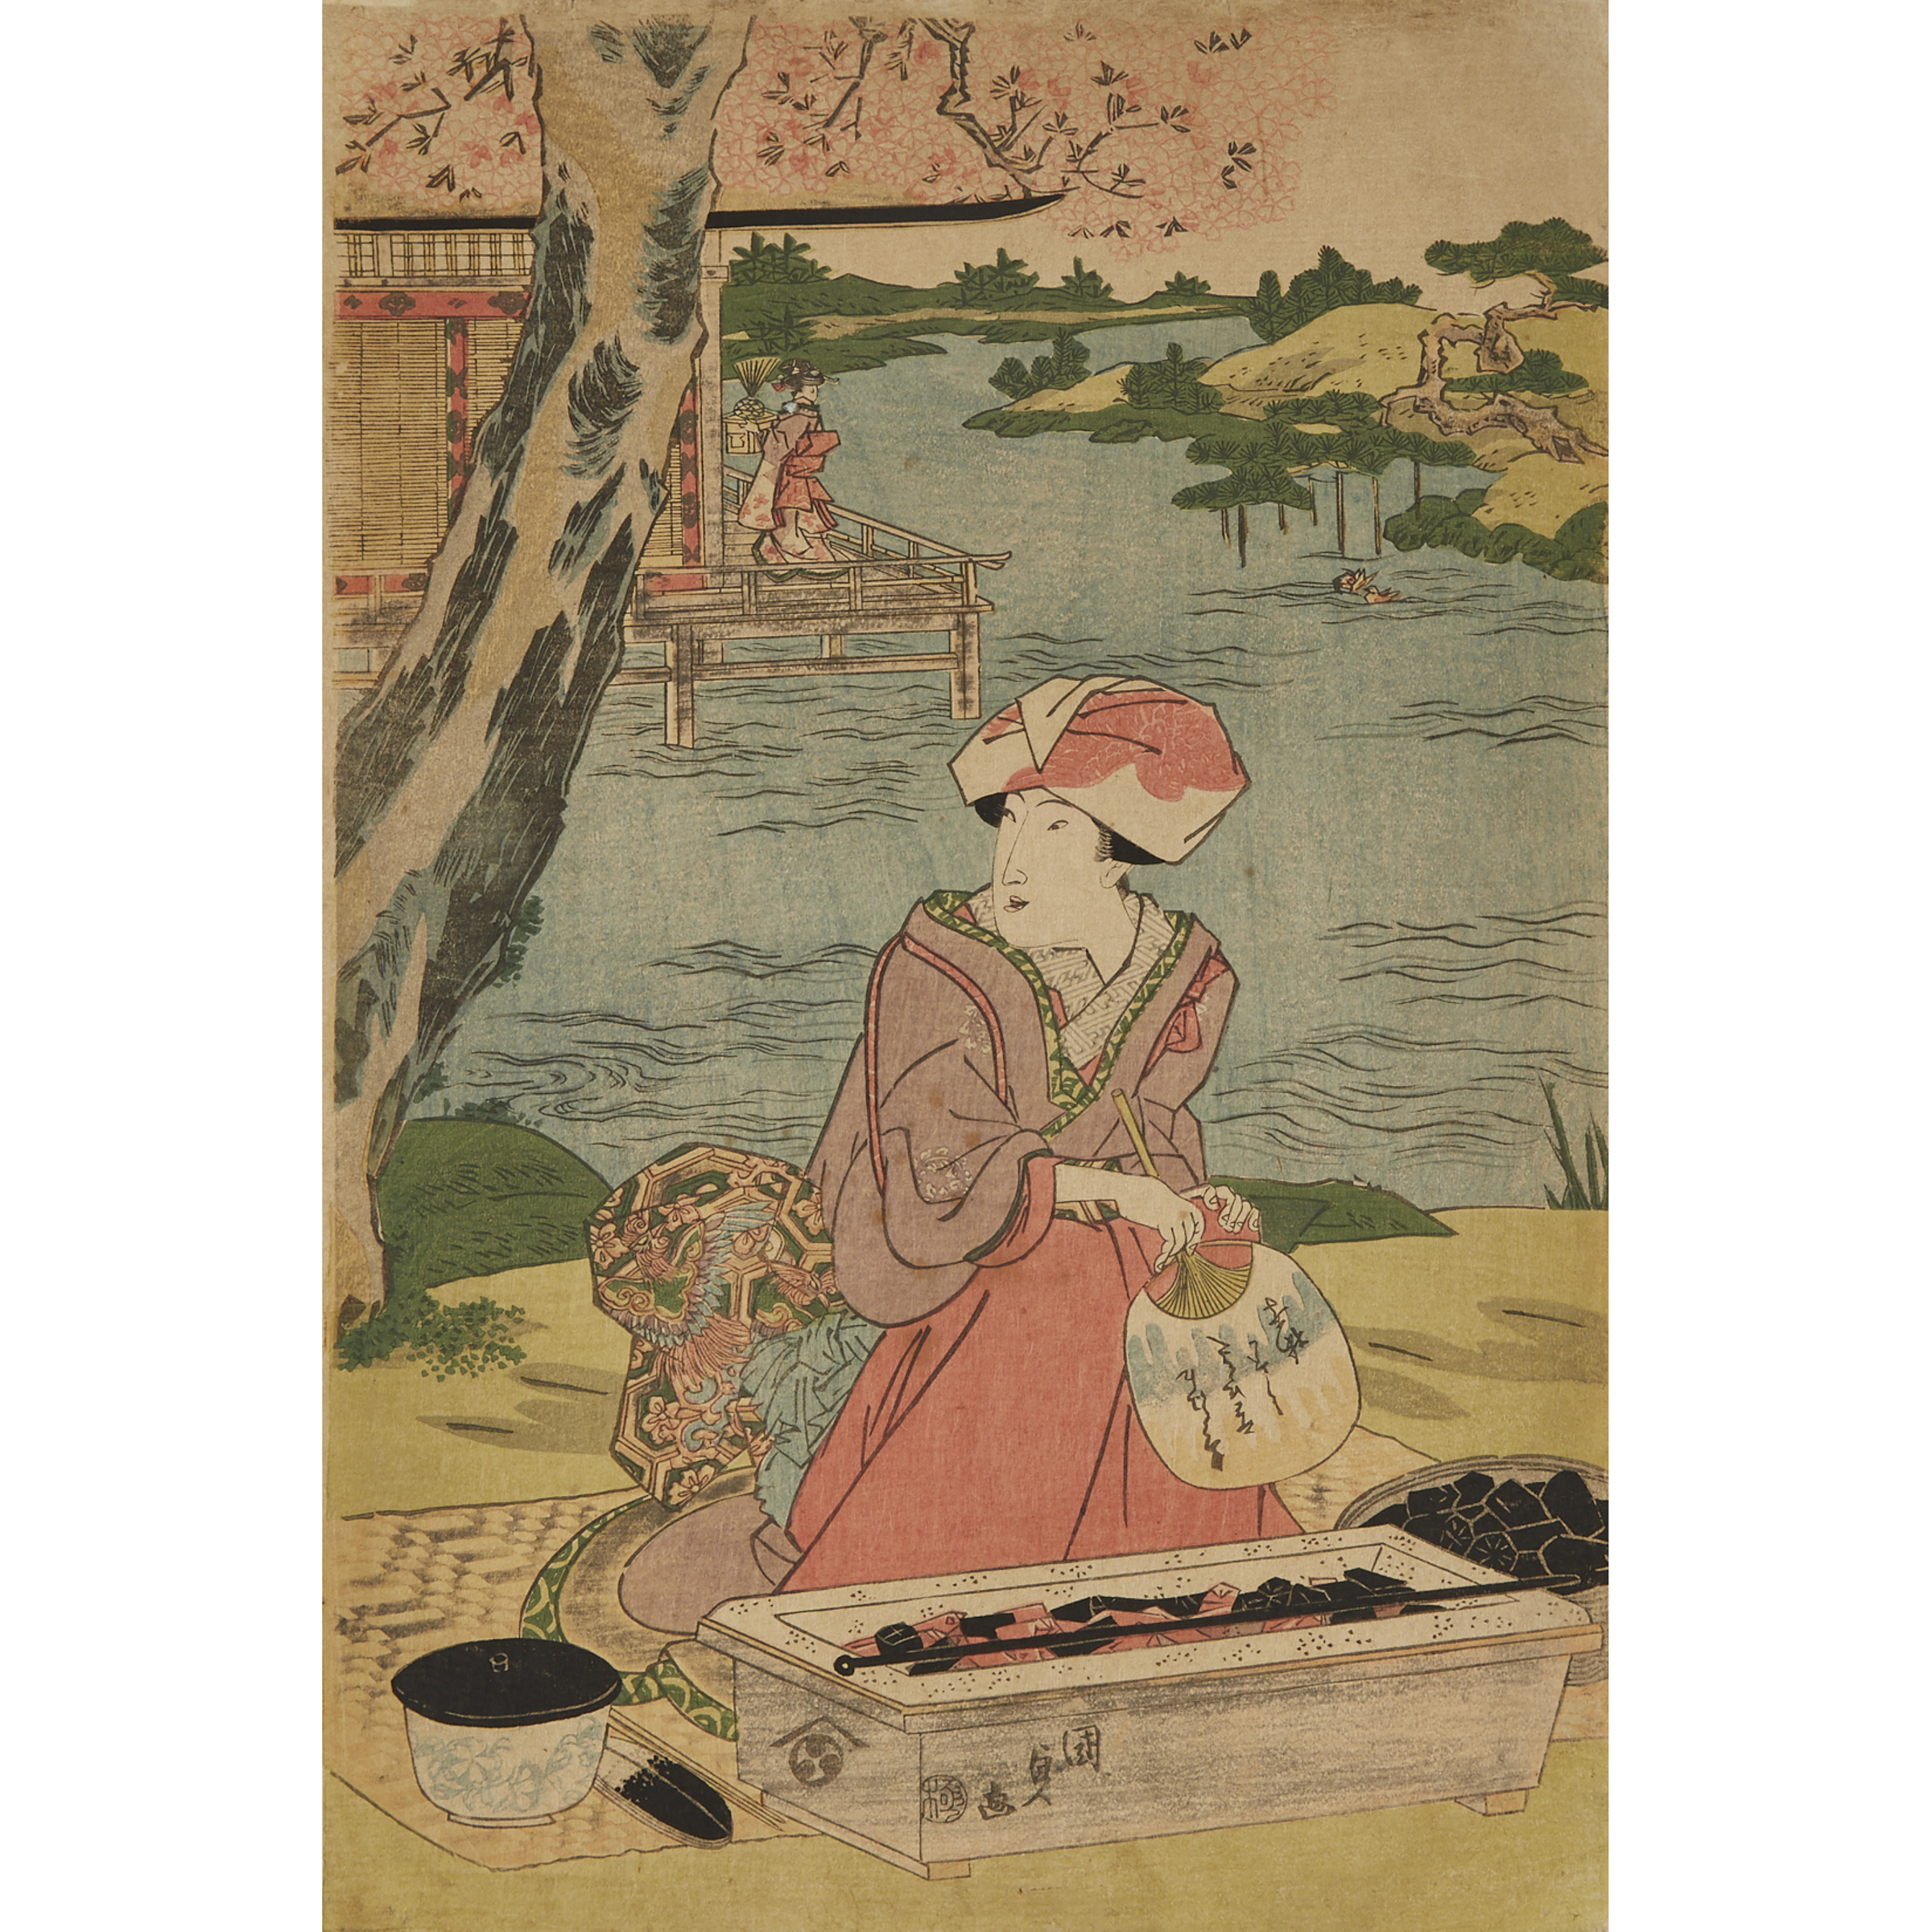 A Group of Four Woodblock Prints by Kunisada, Hiroshige, and Hokusai, 19th/20th Century